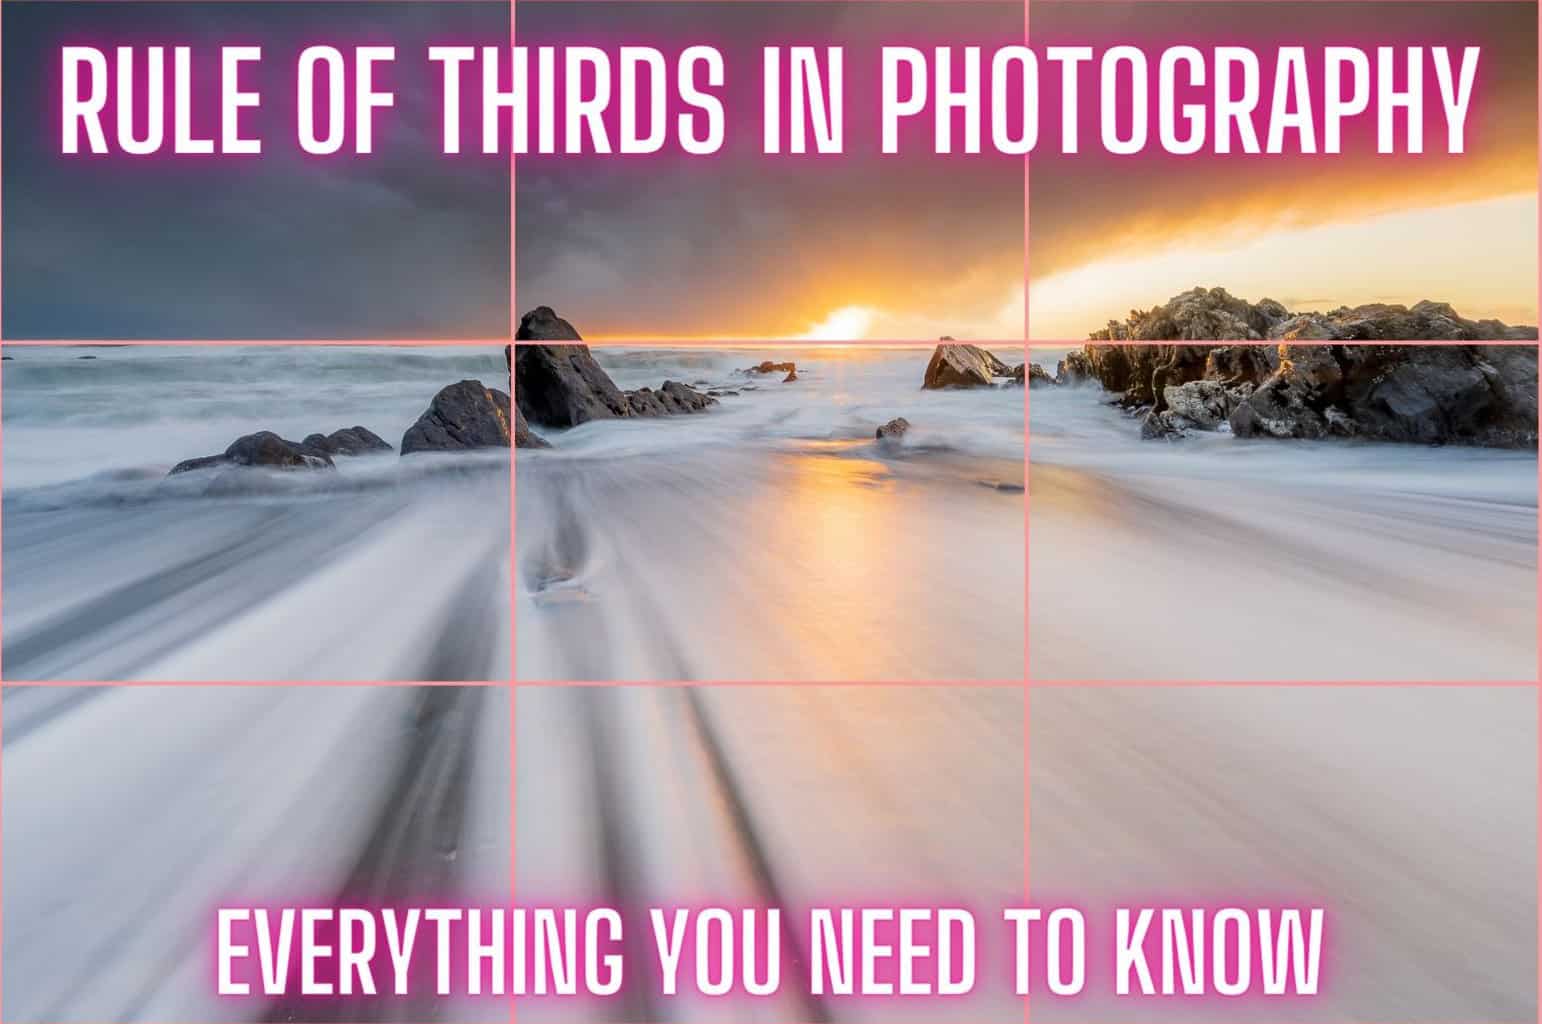 The Rule of thirds in Photography and when to use it.